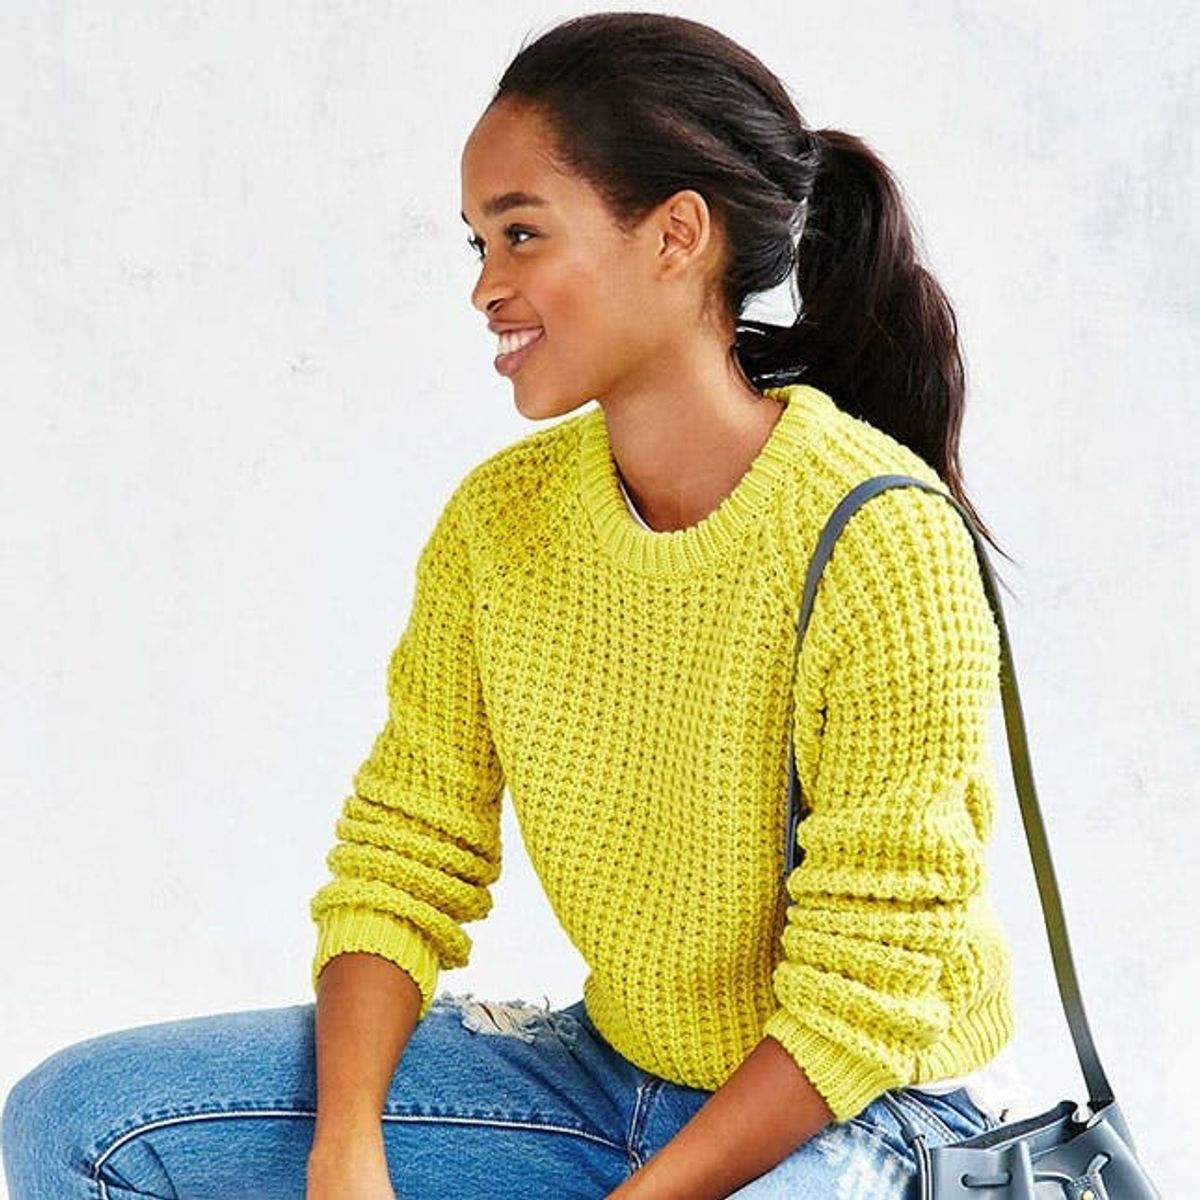 J.Crew’s Head Stylist Says These Are Fall’s 2 Biggest Colors